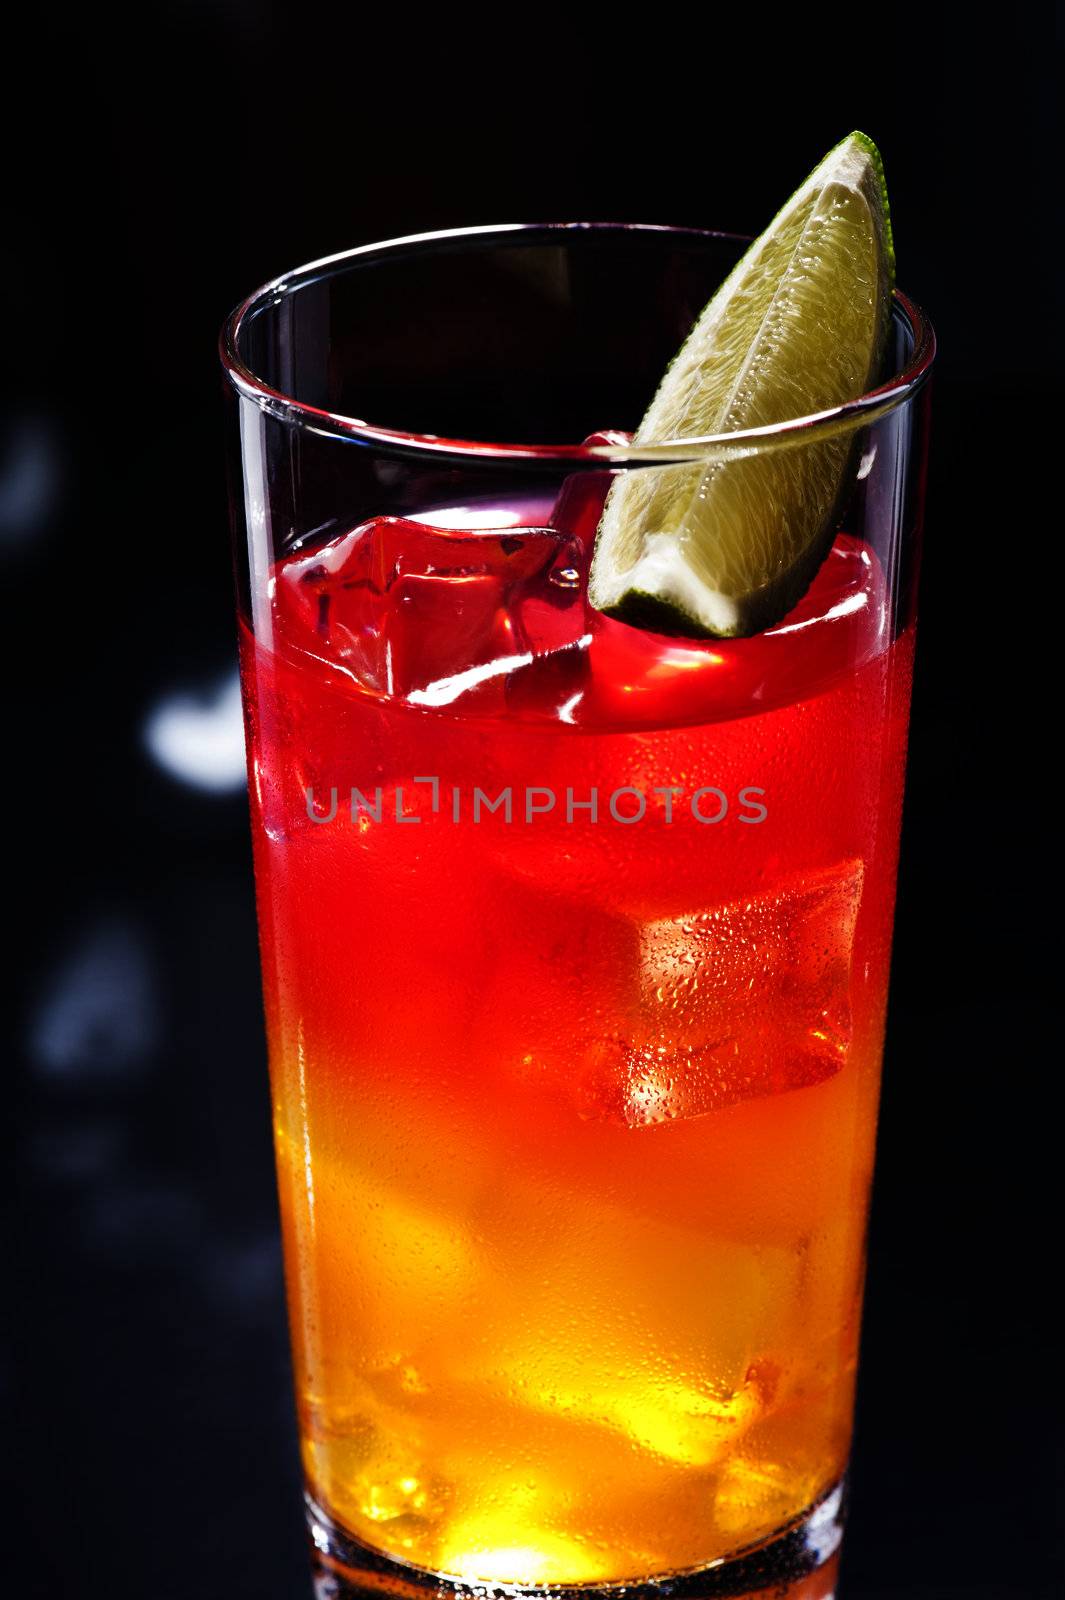 Tequila sunrise, the story about the drink says that it was first served in Cancun and Acapulco in the 1950's. After a brief surge in 70's discos, it lost much of its glory.